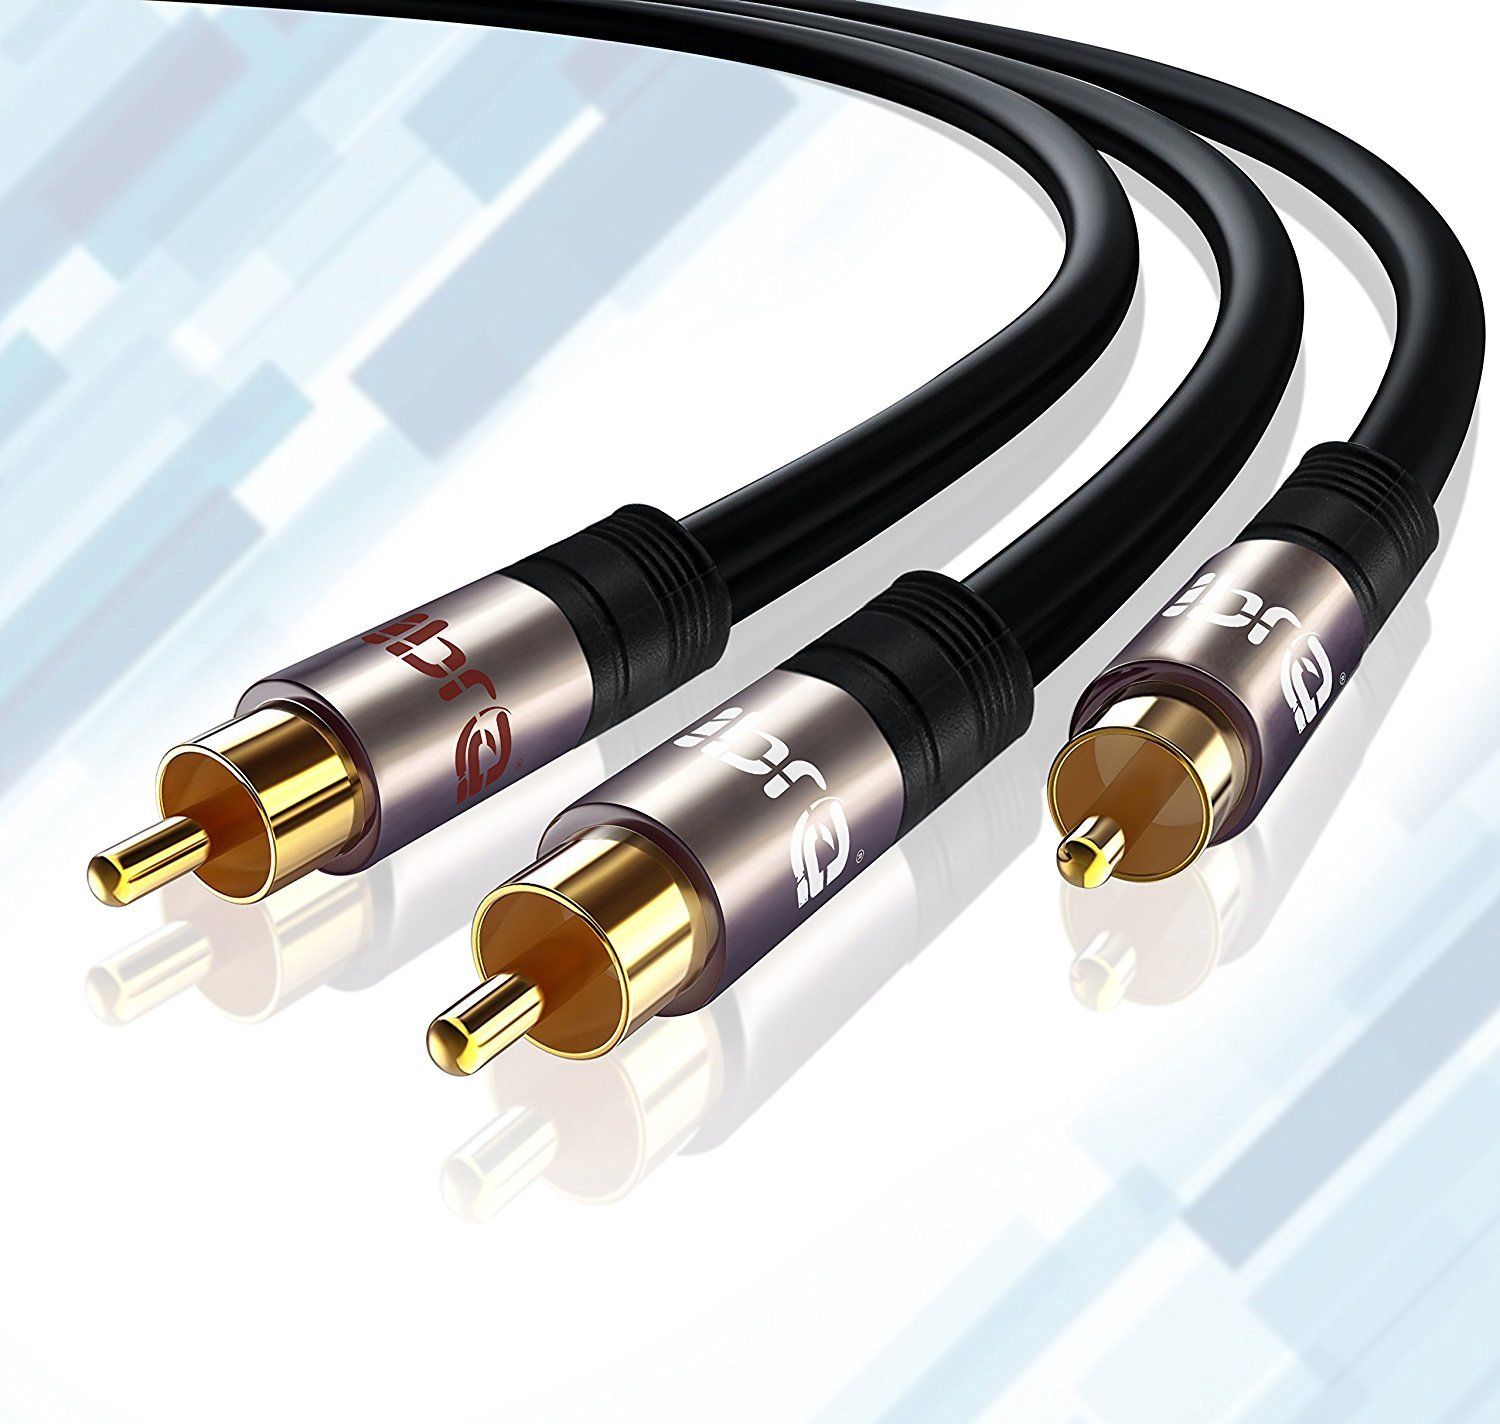 IBRA 1M Y Cable / Subwoofer Cable / Audio Cable / RCA Cable (1 x RCA to 2 x RCA) - GUN Metal Range